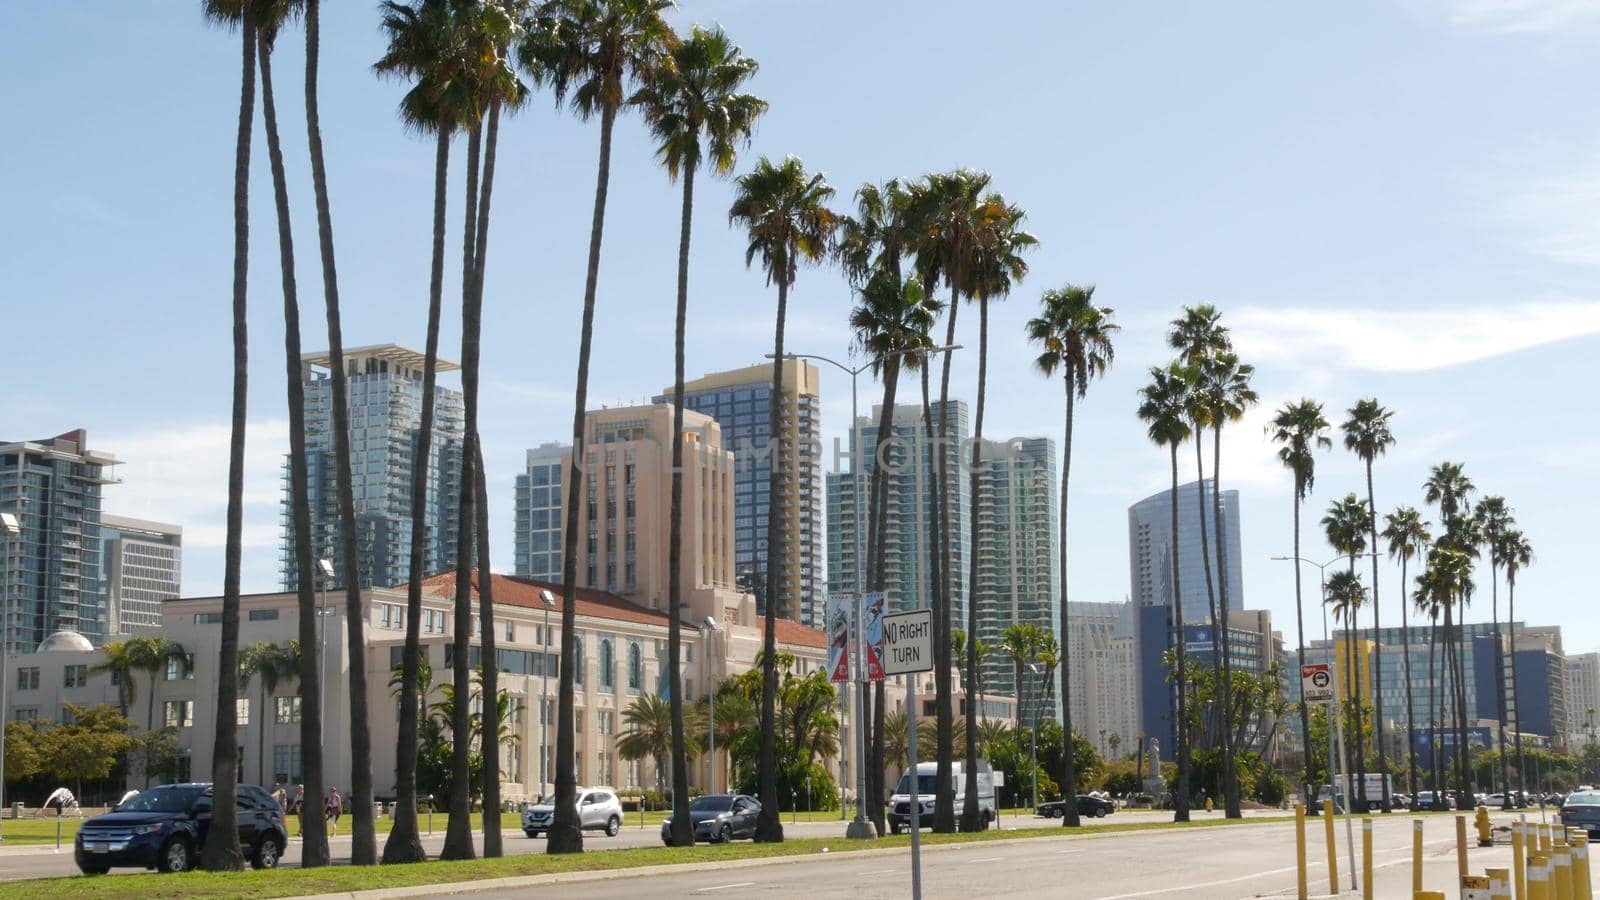 SAN DIEGO, CALIFORNIA USA - 30 JAN 2020: County civic center in downtown. Urban skyline of Gaslamp Quarter. Cityscape of metropolis, pacific harbour waterfront with palm trees. Cars drive on road by DogoraSun